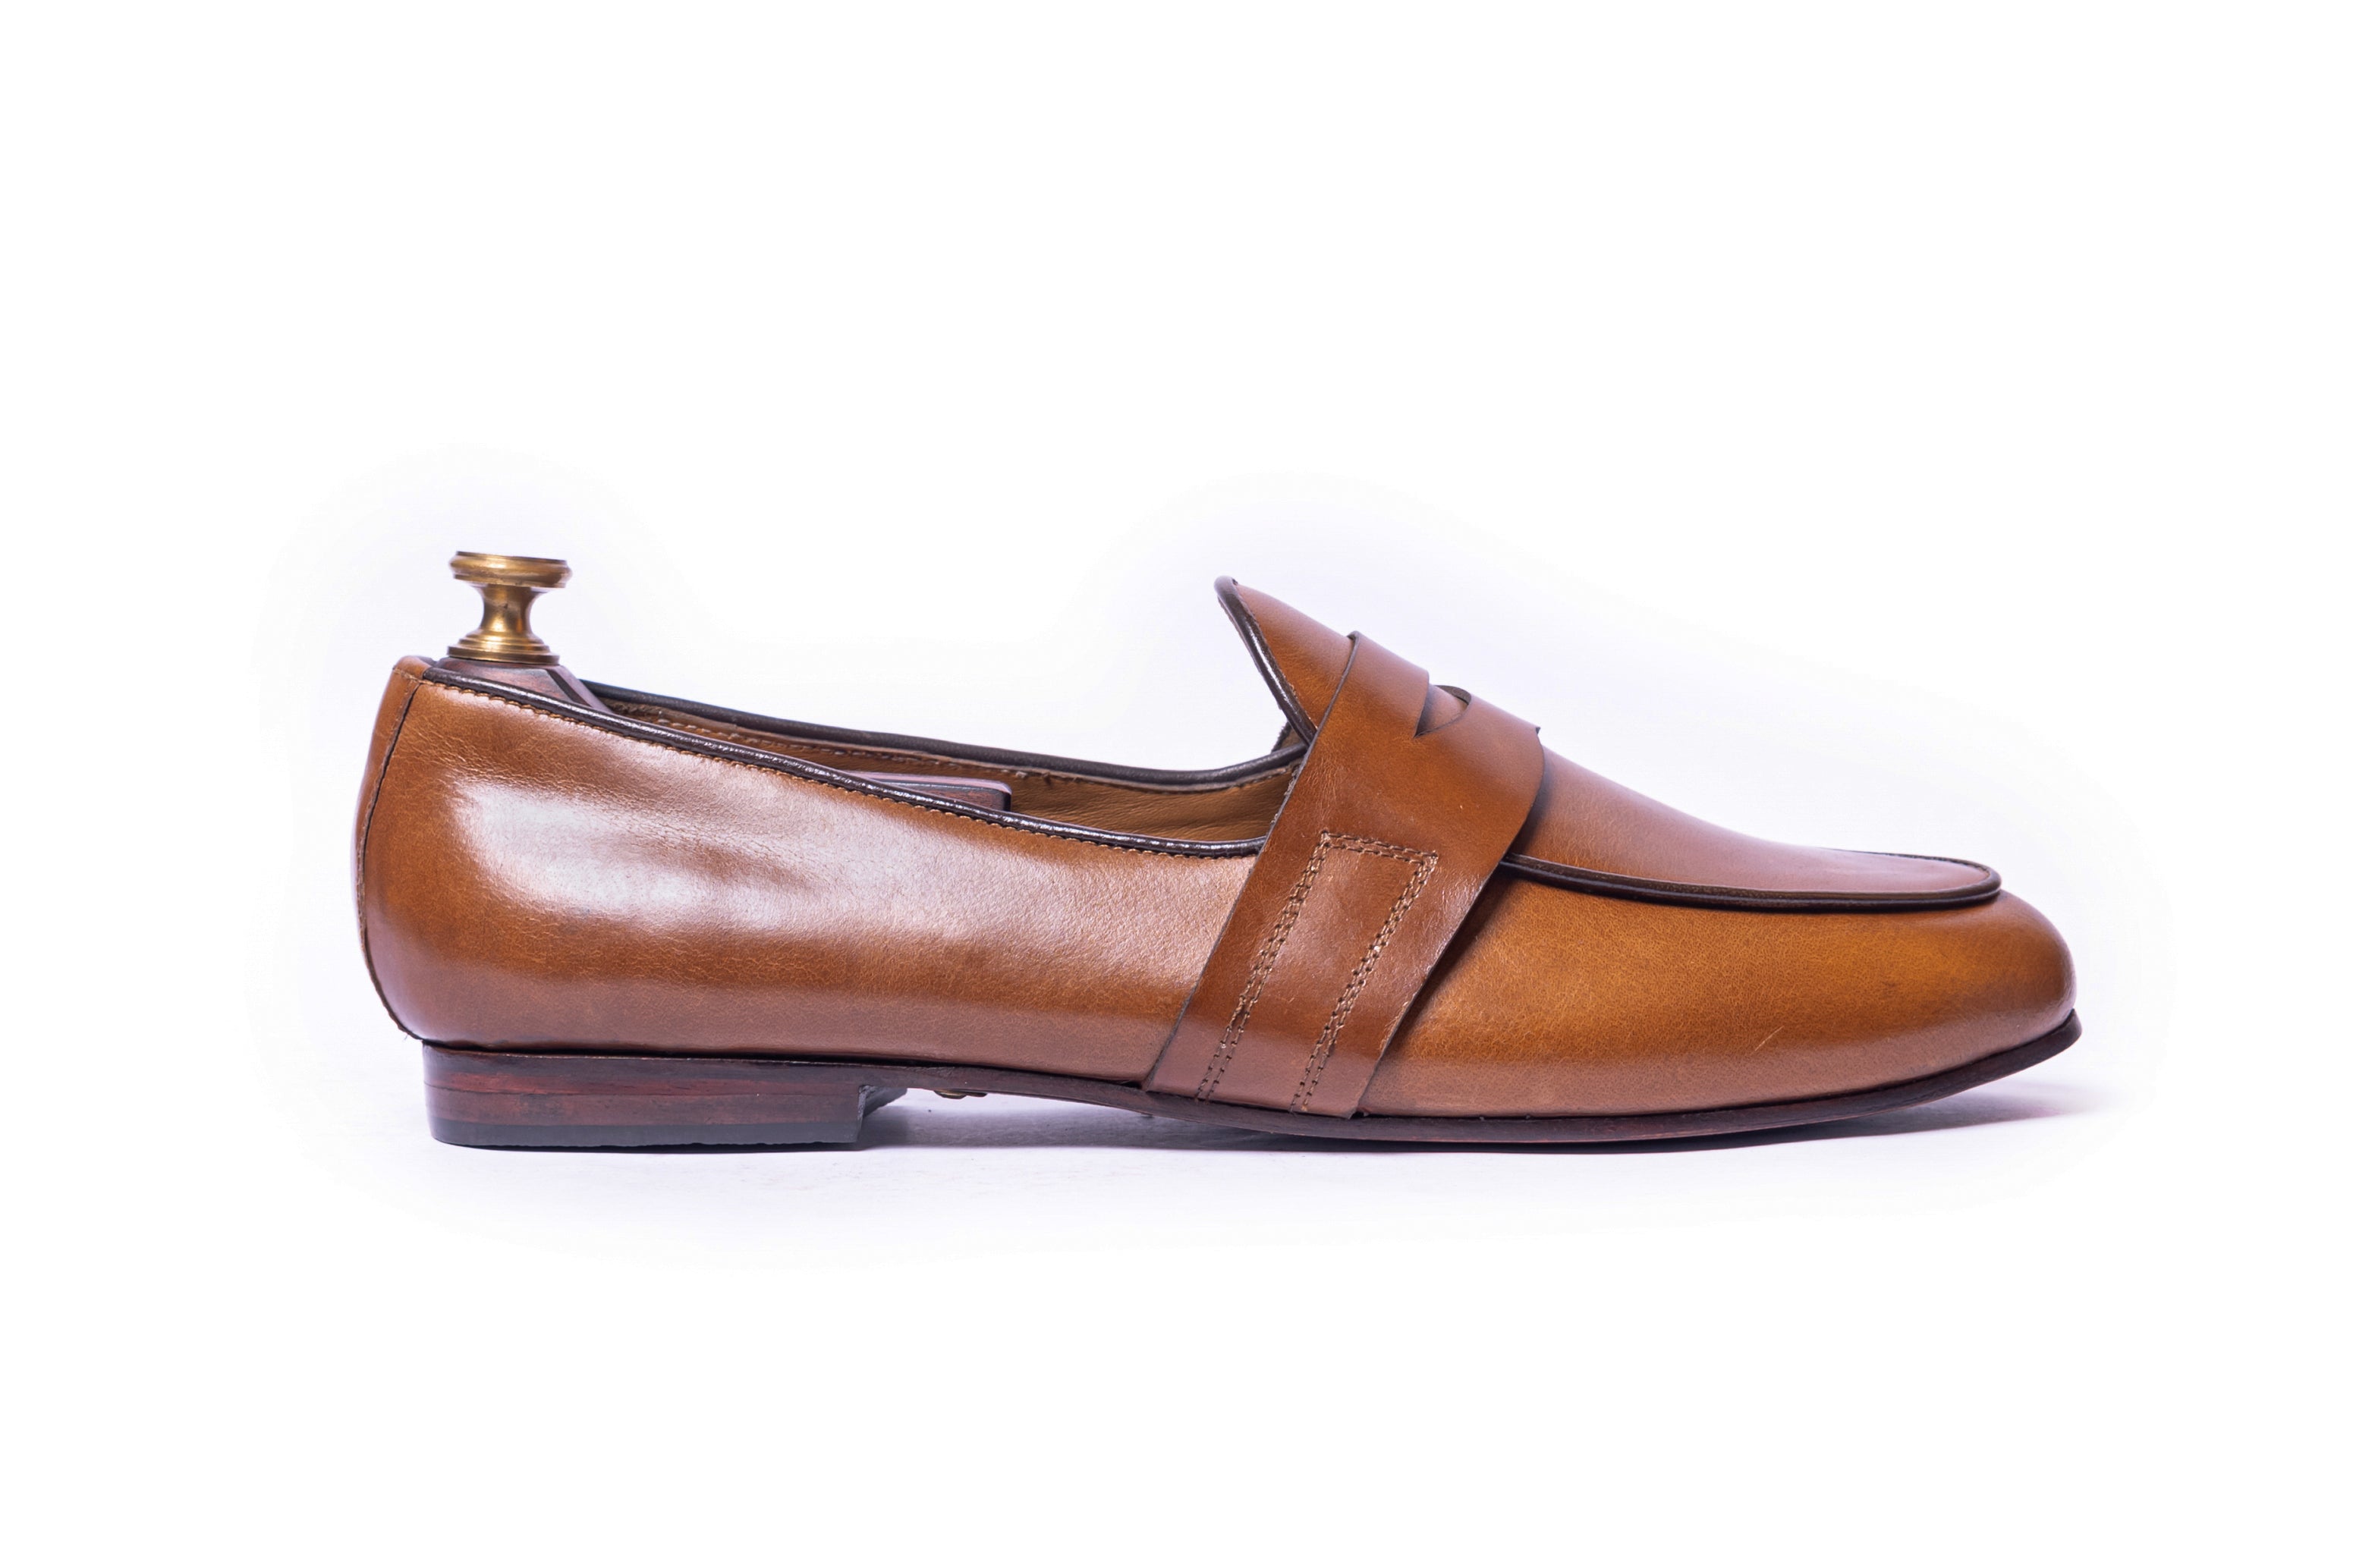 Tanzter loafer